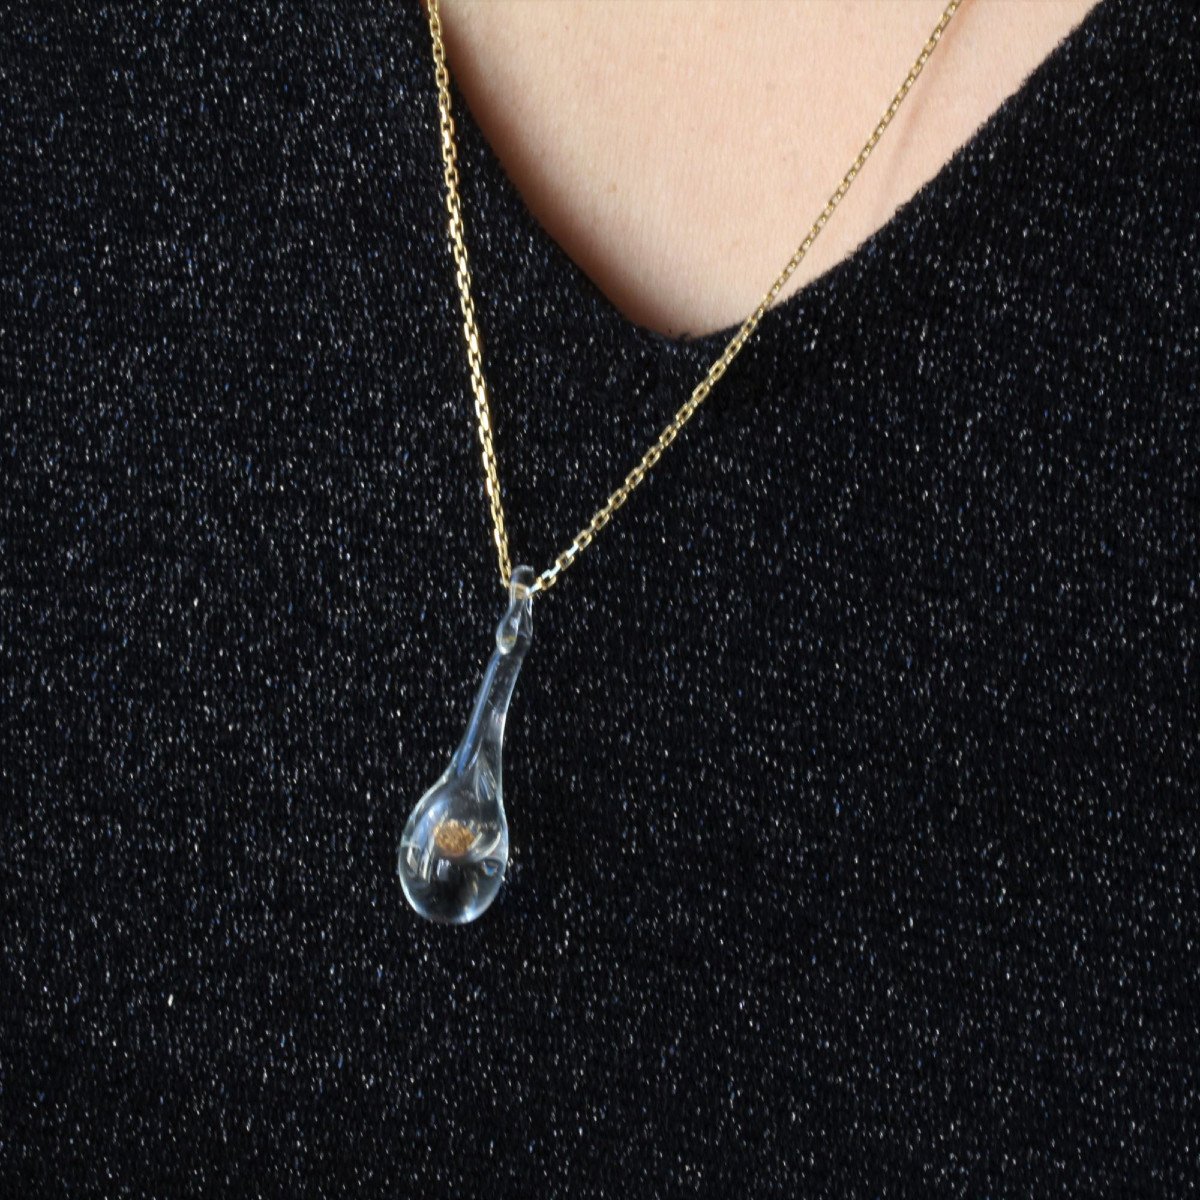 Gold Chain And Its Glass Pendant And Gold Glitter-photo-2